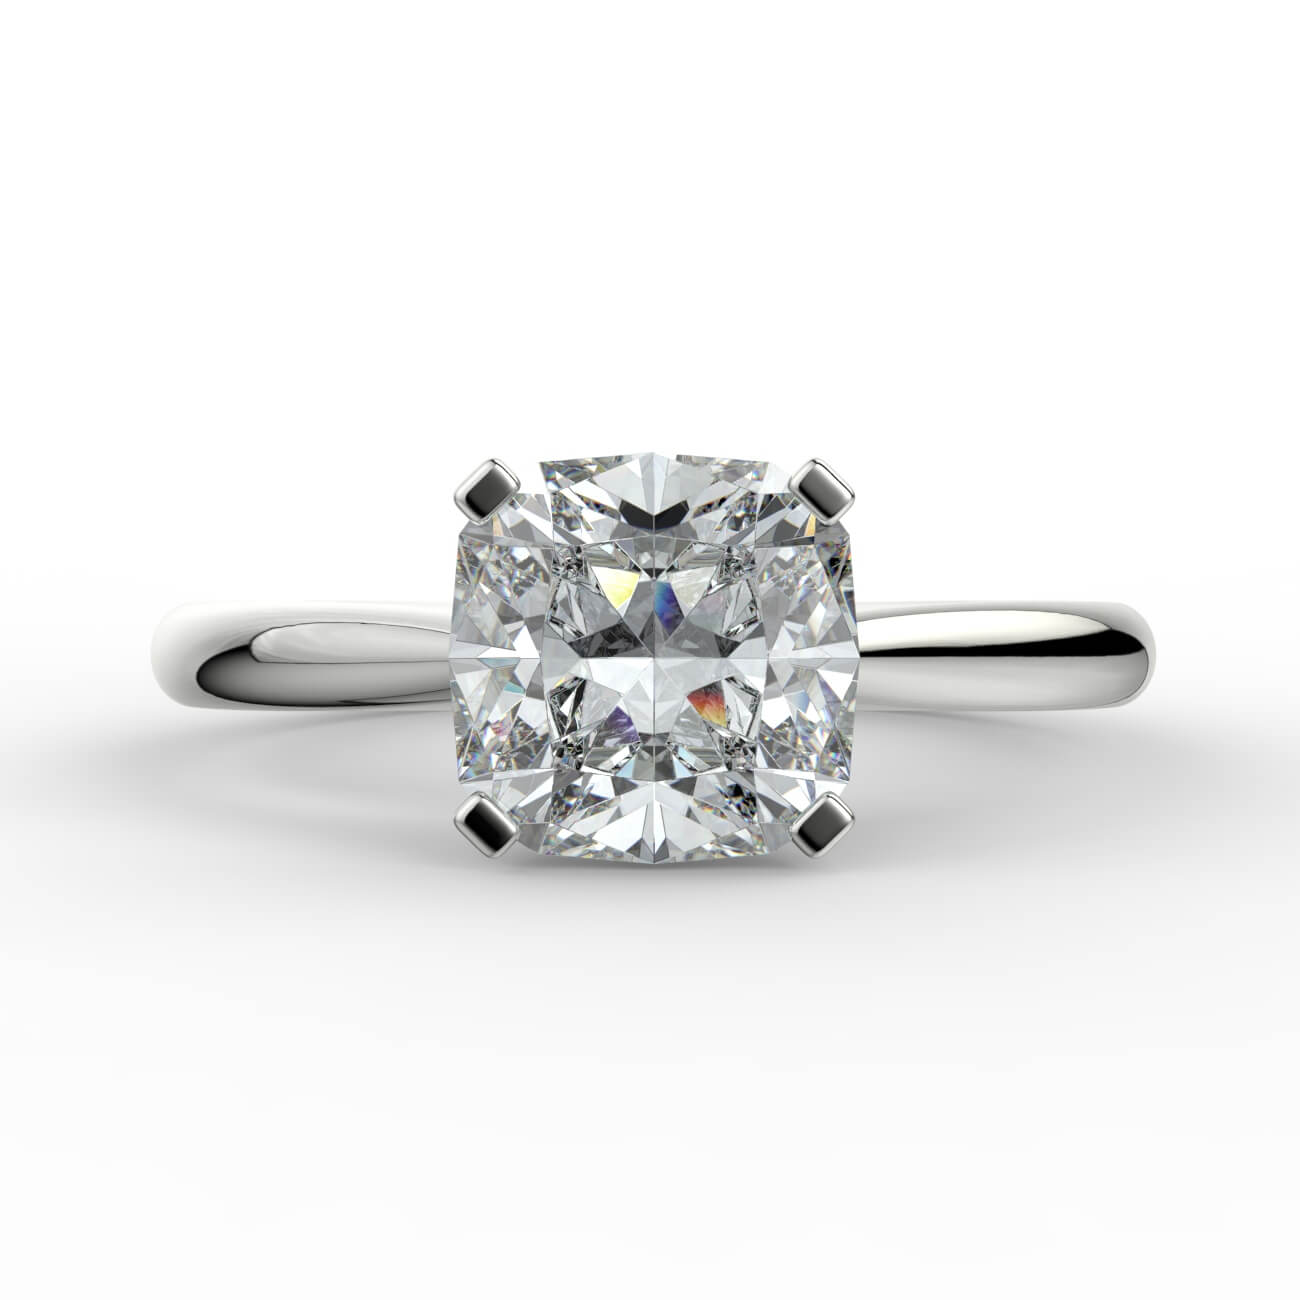 Cushion cut diamond cathedral engagement ring in white gold – Australian Diamond Network